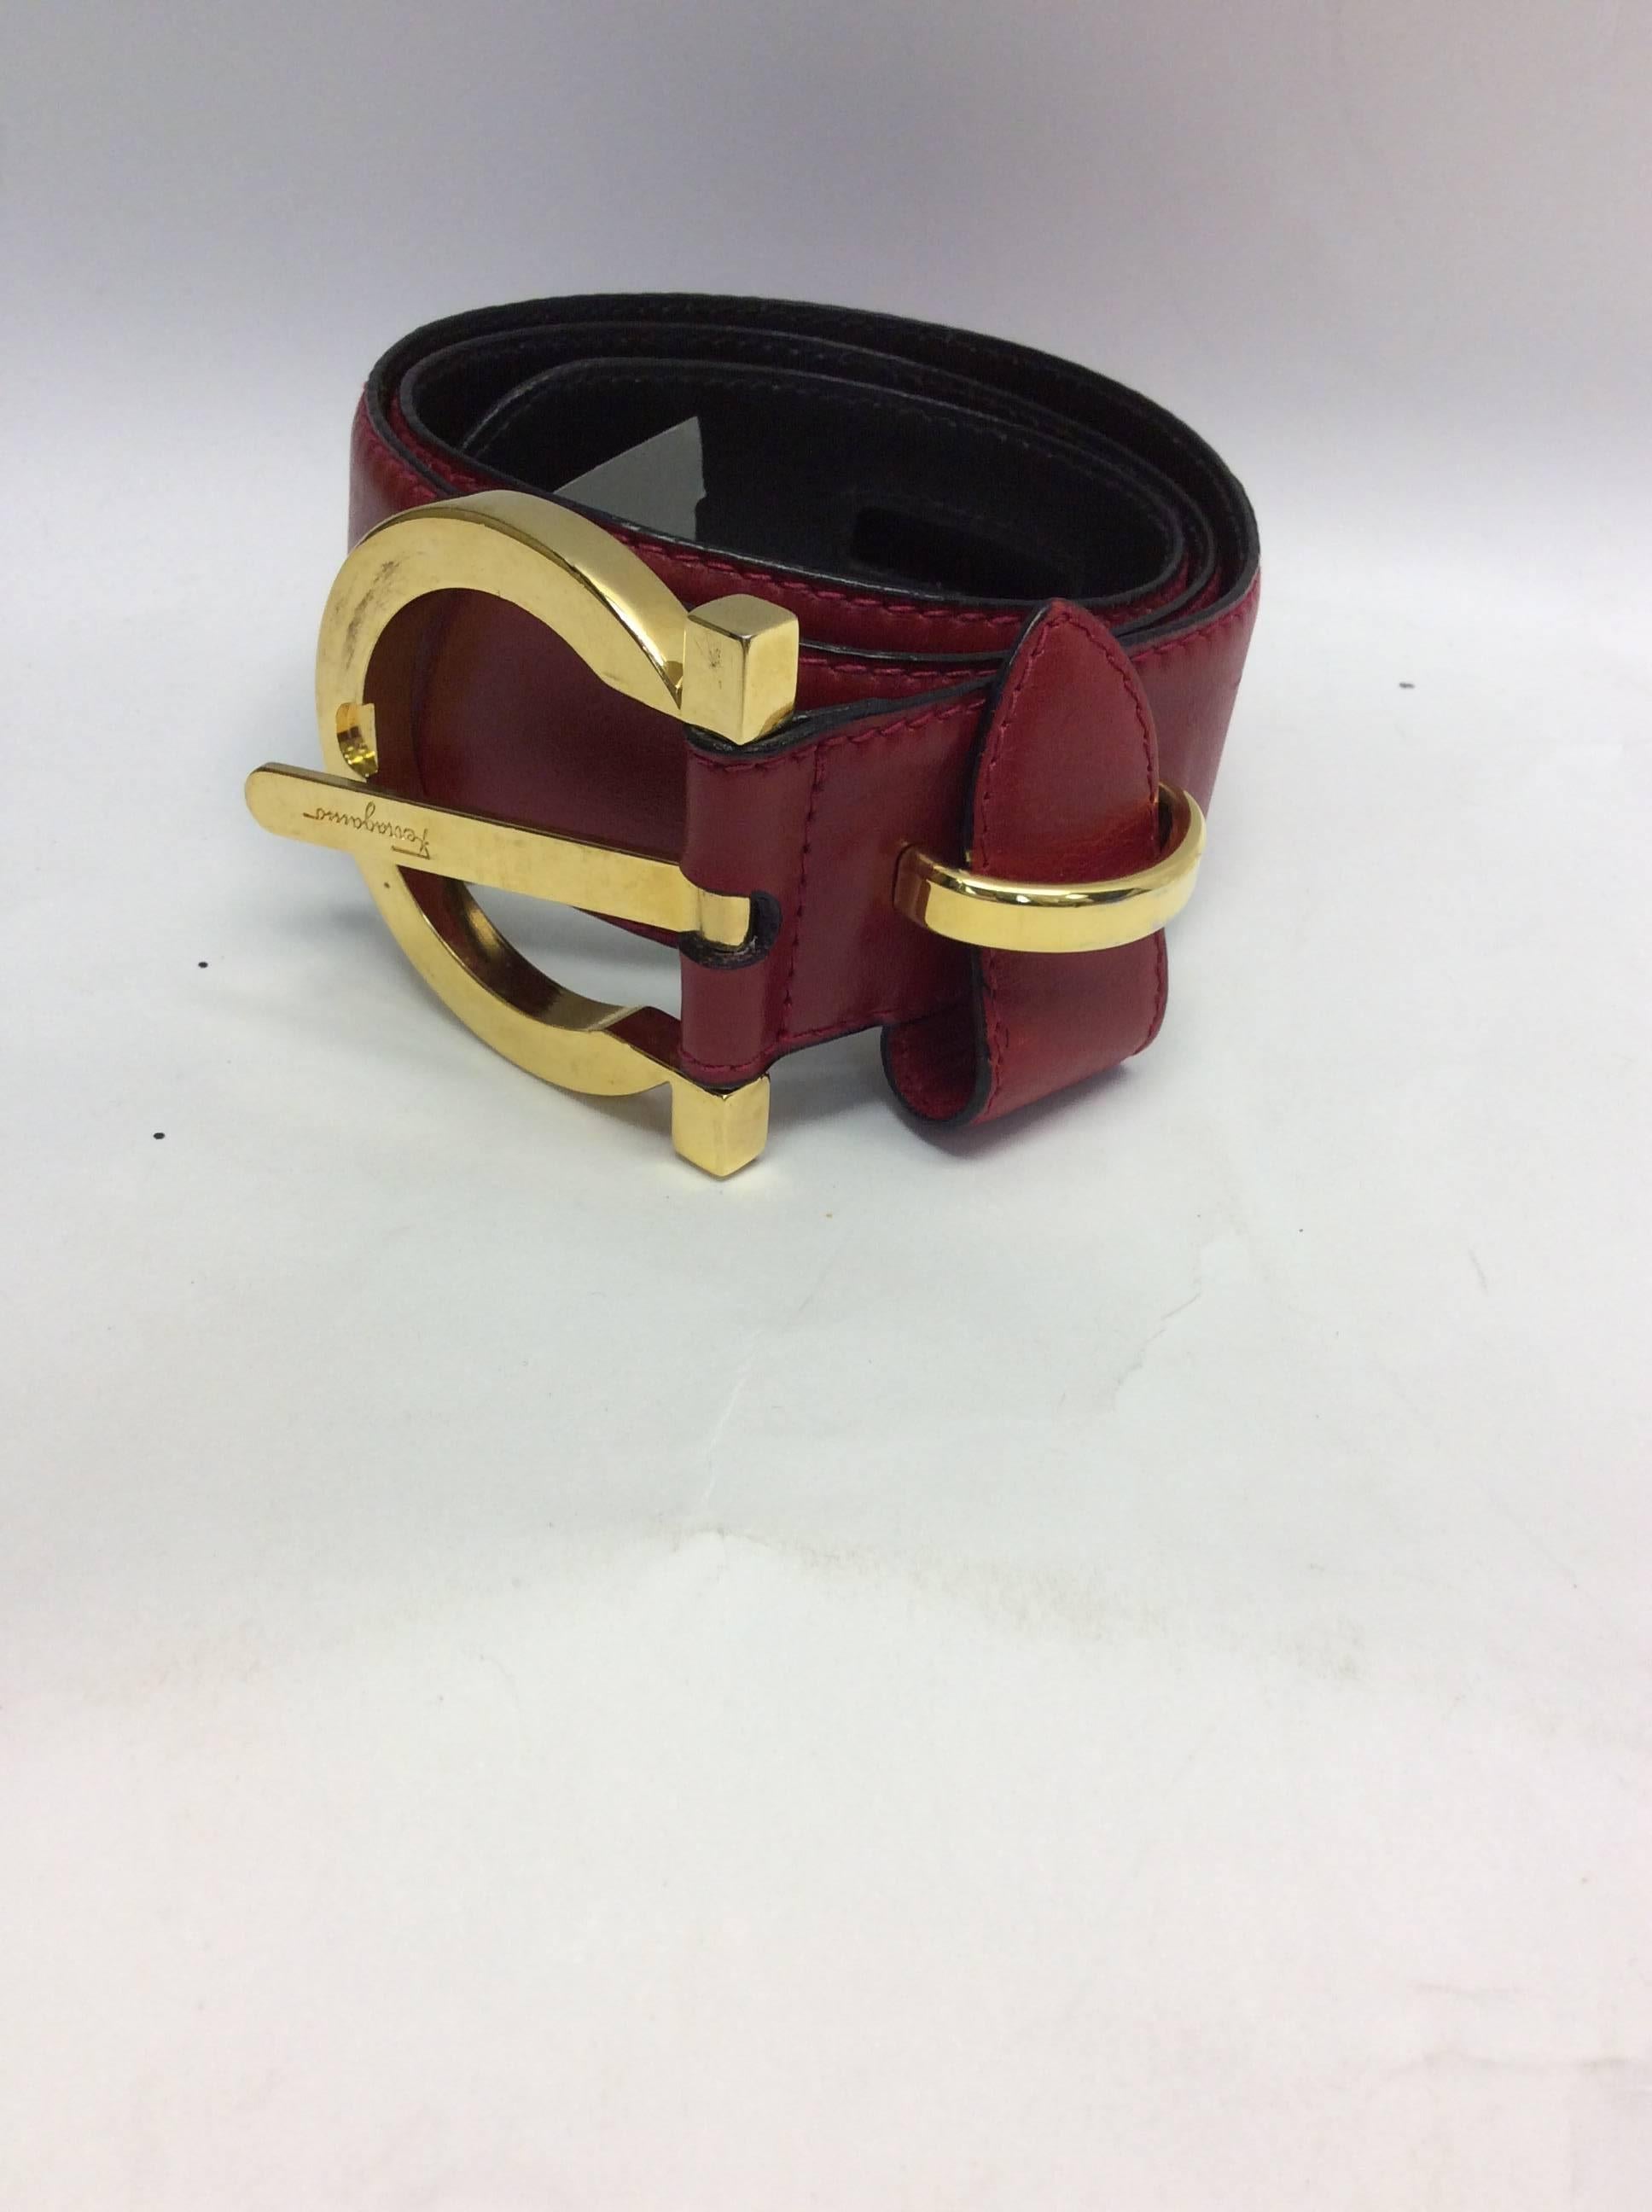 Red Salvatore Ferragamo Leather Belt
Gold toned hardware
$150
34 inches long
